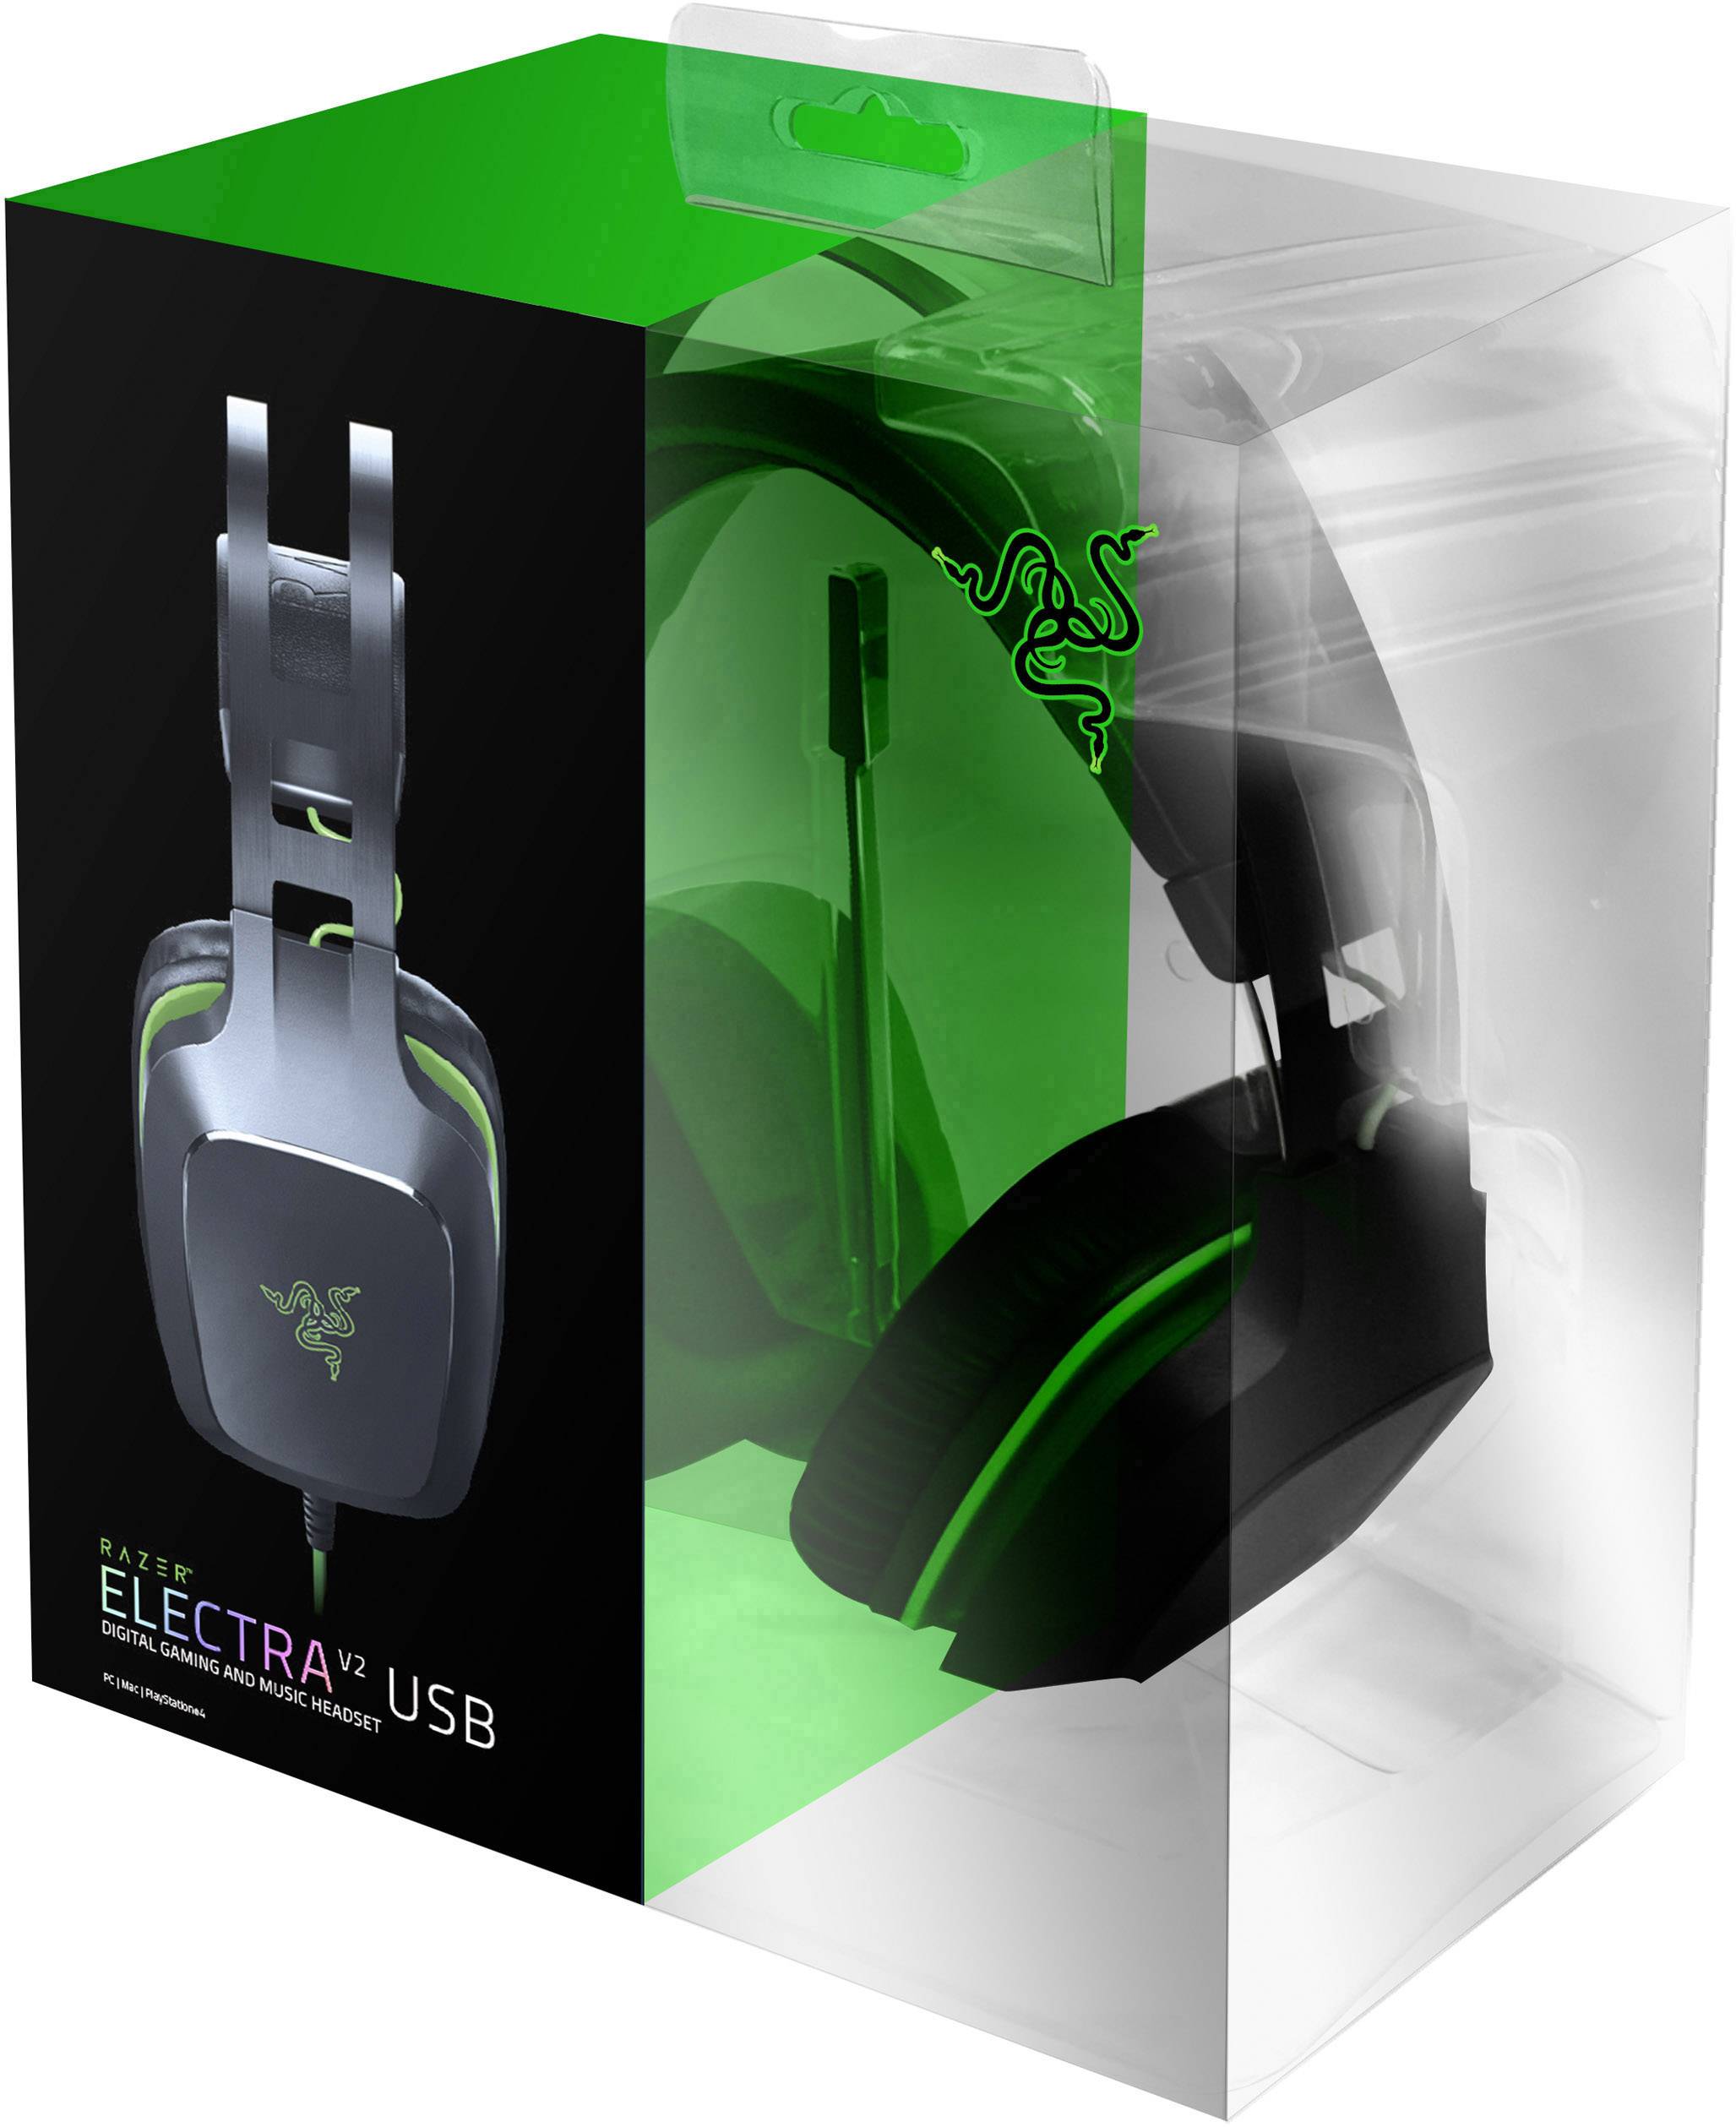 Electra V2 USB Gaming Over-ear headset Corded (1075100) Surround Black Volume control, Microphone mute | Conrad.com